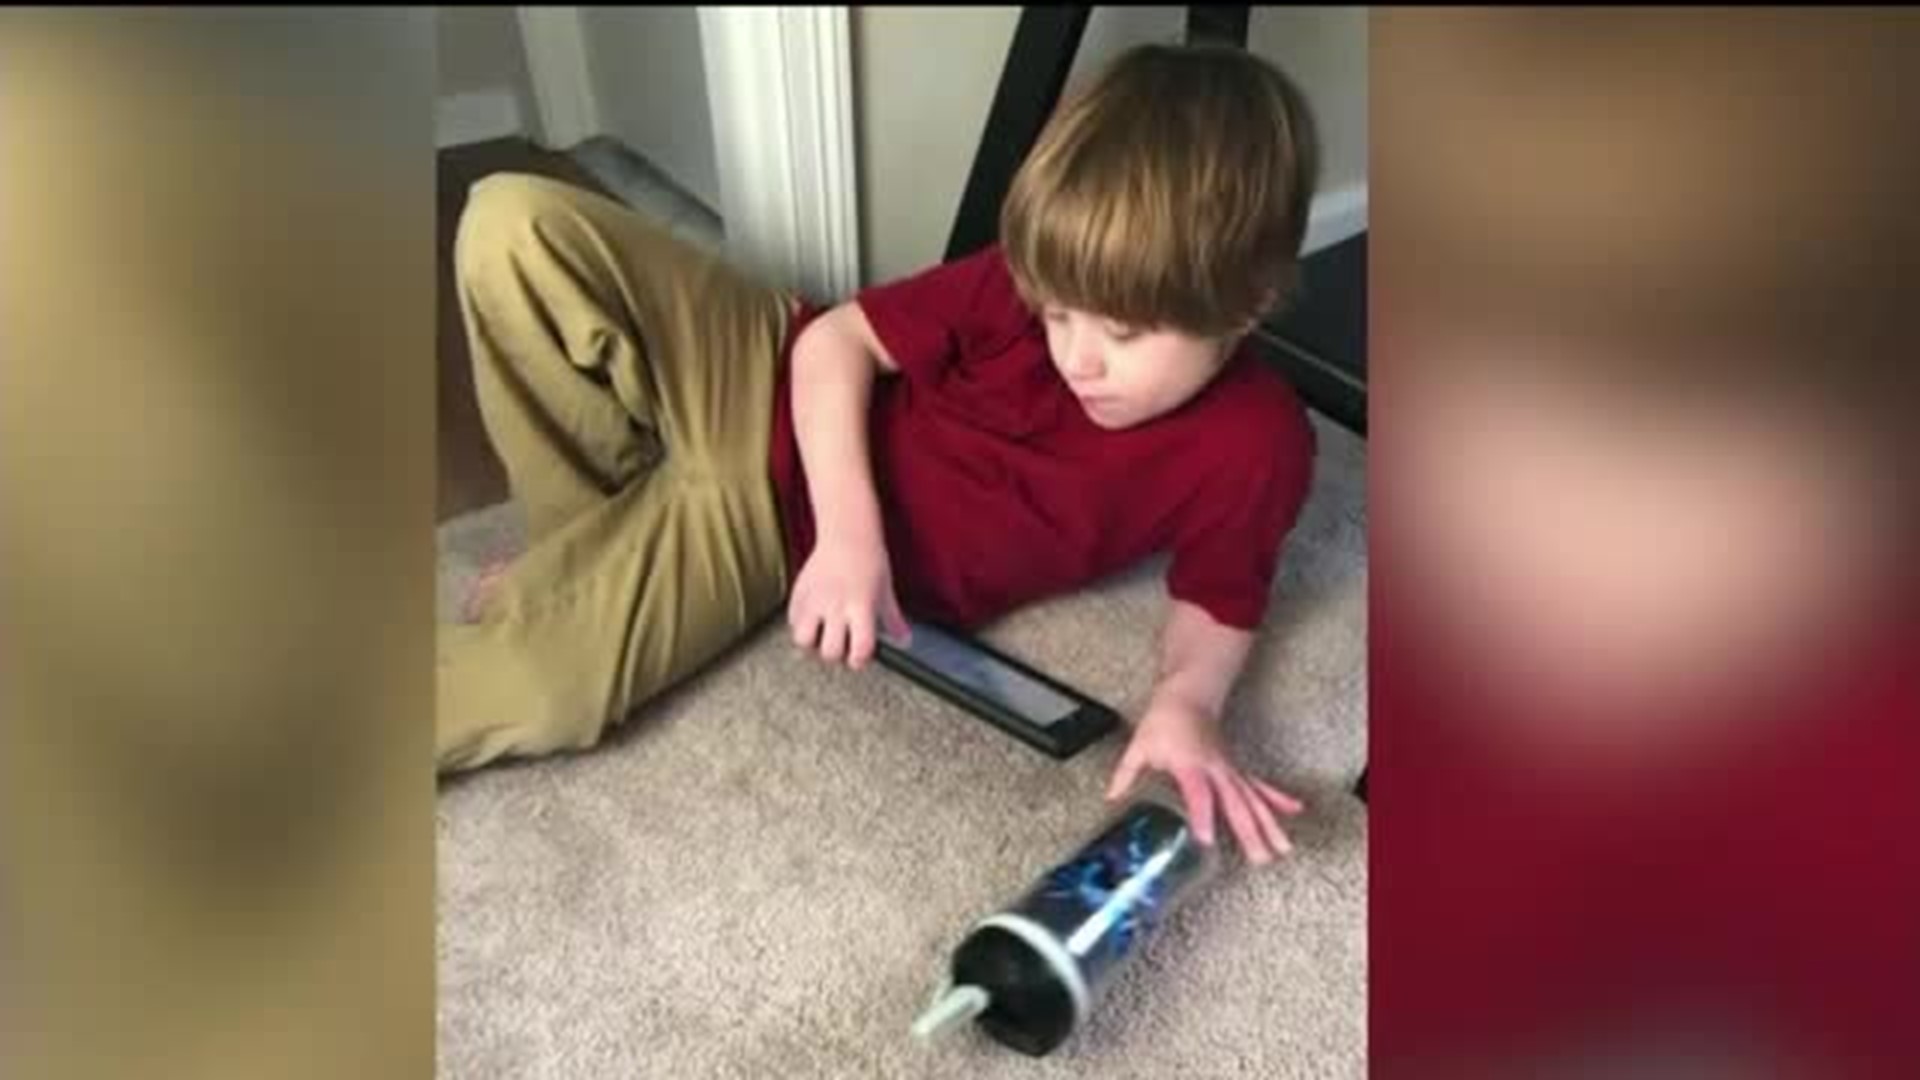 Mom Hopes to Find Lost Cell Phone for Son with Autism